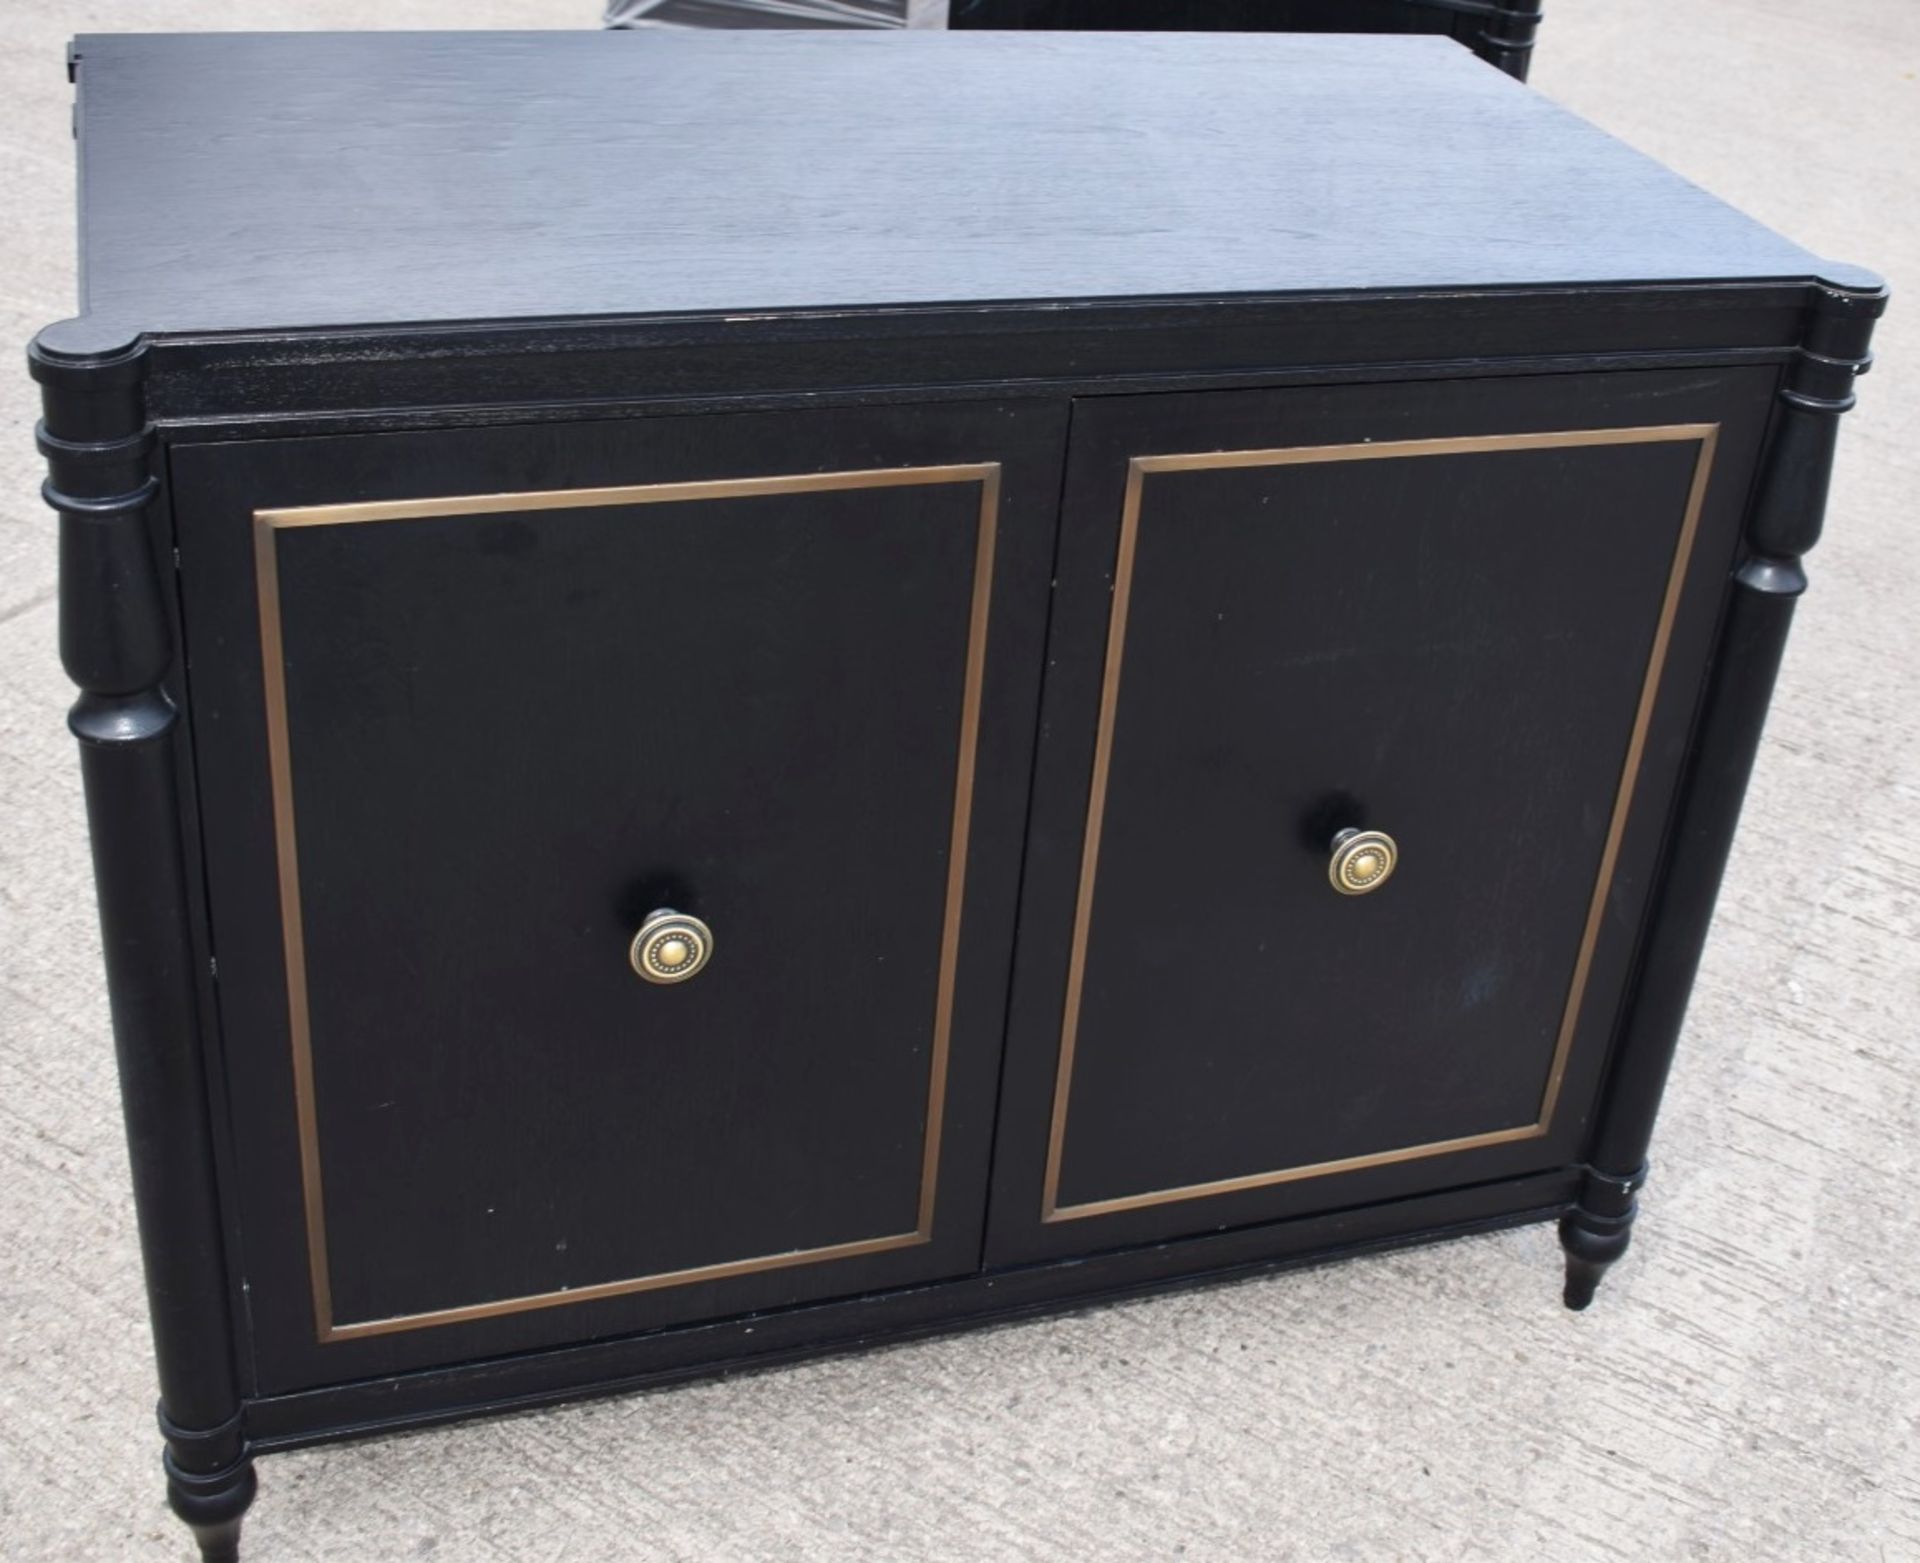 1 x Opulent 2-Door French Period-Style Handcrafted Solid Wood Cabinet in Black, with Brass Inlaid - Image 2 of 10